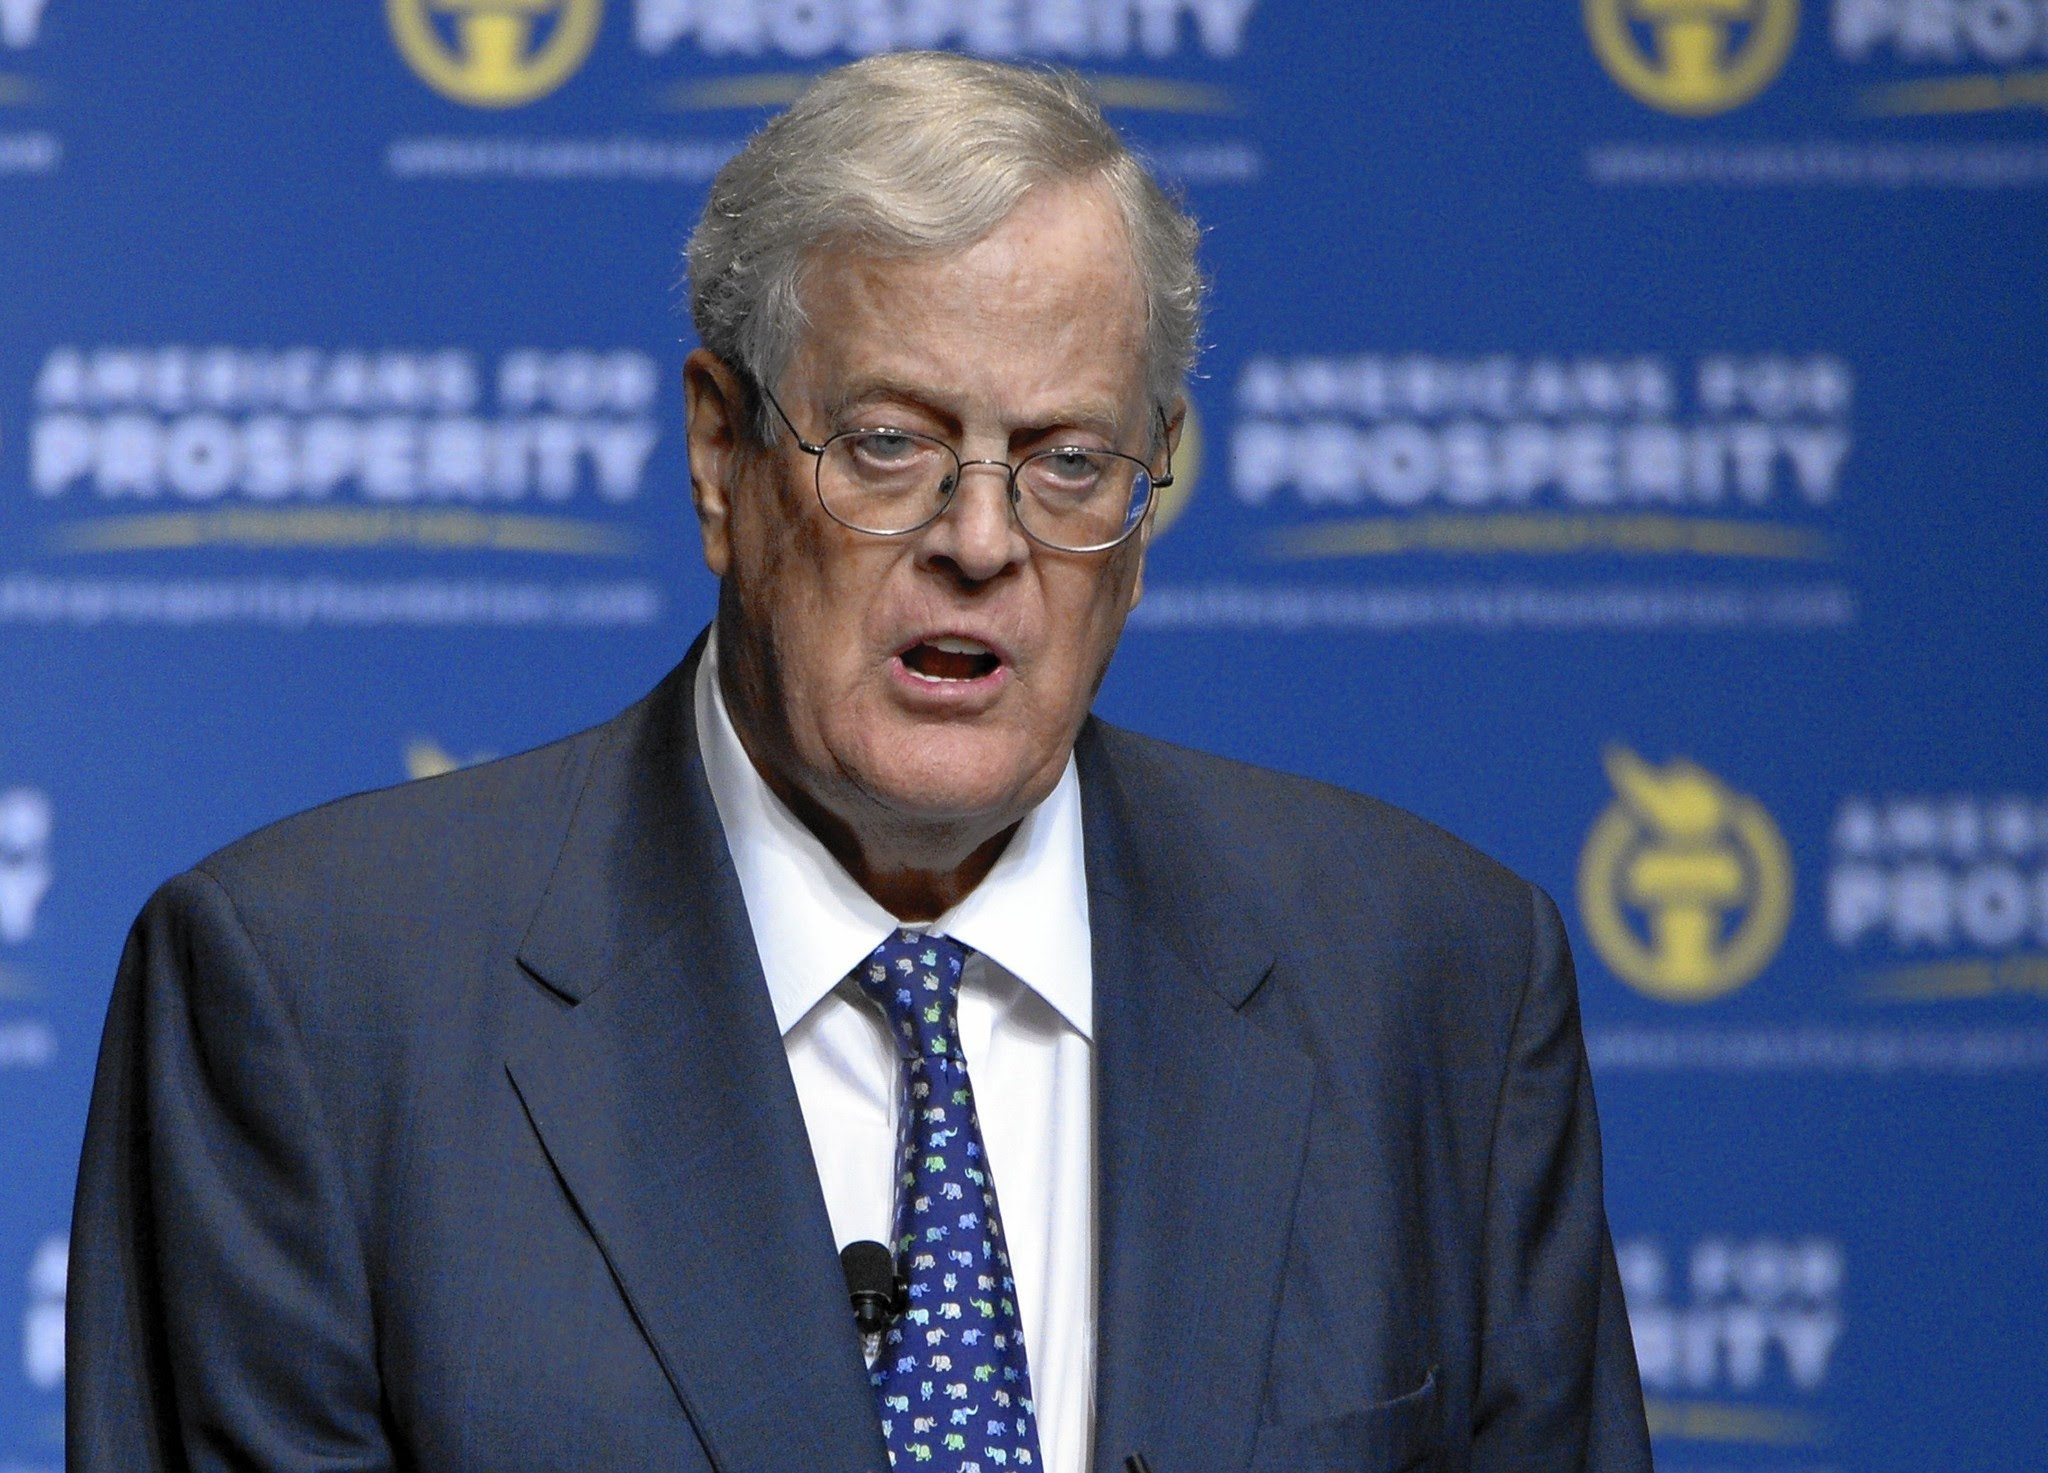 Koch-backed group with ties to liberal causes? Critics call it a charade